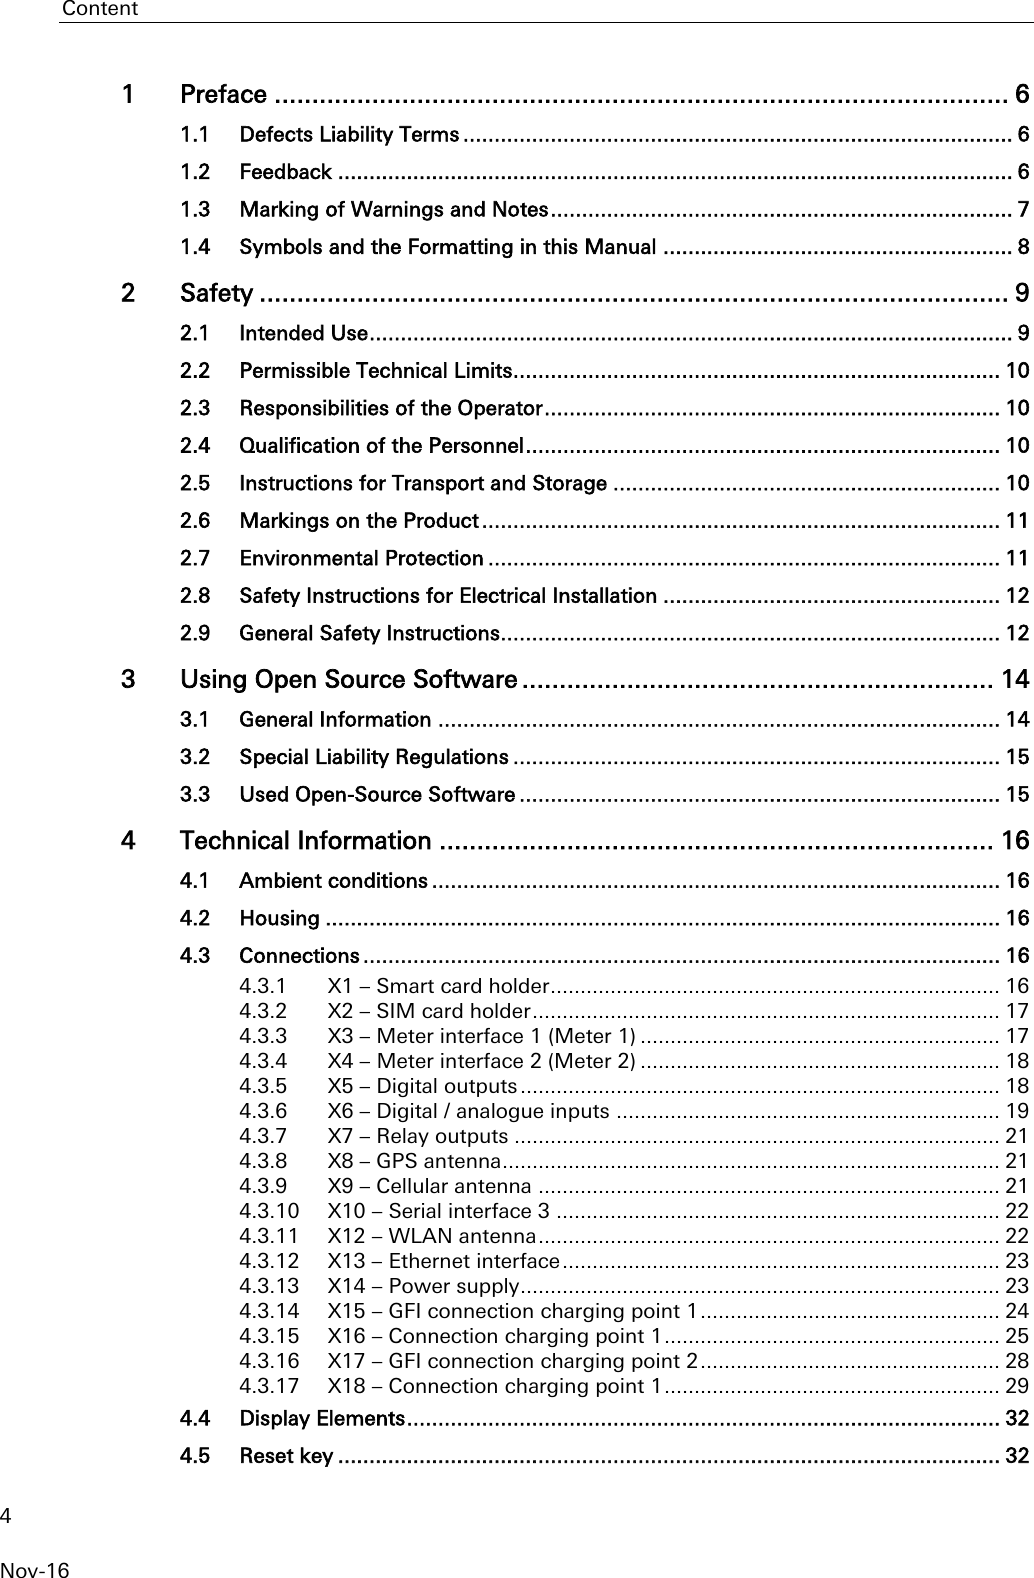 Content 4 Nov-16 1 Preface .................................................................................................. 6 1.1 Defects Liability Terms ........................................................................................ 6 1.2 Feedback ............................................................................................................ 6 1.3 Marking of Warnings and Notes .......................................................................... 7 1.4 Symbols and the Formatting in this Manual ........................................................ 8 2 Safety .................................................................................................... 9 2.1 Intended Use ....................................................................................................... 9 2.2 Permissible Technical Limits.............................................................................. 10 2.3 Responsibilities of the Operator ......................................................................... 10 2.4 Qualification of the Personnel ............................................................................ 10 2.5 Instructions for Transport and Storage .............................................................. 10 2.6 Markings on the Product ................................................................................... 11 2.7 Environmental Protection .................................................................................. 11 2.8 Safety Instructions for Electrical Installation ...................................................... 12 2.9 General Safety Instructions................................................................................ 12 3 Using Open Source Software ............................................................... 14 3.1 General Information .......................................................................................... 14 3.2 Special Liability Regulations .............................................................................. 15 3.3 Used Open-Source Software ............................................................................. 15 4 Technical Information .......................................................................... 16 4.1 Ambient conditions ........................................................................................... 16 4.2 Housing ............................................................................................................ 16 4.3 Connections ...................................................................................................... 16 4.3.1 X1 – Smart card holder ........................................................................... 16 4.3.2 X2 – SIM card holder .............................................................................. 17 4.3.3 X3 – Meter interface 1 (Meter 1) ............................................................ 17 4.3.4 X4 – Meter interface 2 (Meter 2) ............................................................ 18 4.3.5 X5 – Digital outputs ................................................................................ 18 4.3.6 X6 – Digital / analogue inputs ................................................................ 19 4.3.7 X7 – Relay outputs ................................................................................. 21 4.3.8 X8 – GPS antenna ................................................................................... 21 4.3.9 X9 – Cellular antenna ............................................................................. 21 4.3.10 X10 – Serial interface 3 .......................................................................... 22 4.3.11 X12 – WLAN antenna ............................................................................. 22 4.3.12 X13 – Ethernet interface ......................................................................... 23 4.3.13 X14 – Power supply ................................................................................ 23 4.3.14 X15 – GFI connection charging point 1 .................................................. 24 4.3.15 X16 – Connection charging point 1 ........................................................ 25 4.3.16 X17 – GFI connection charging point 2 .................................................. 28 4.3.17 X18 – Connection charging point 1 ........................................................ 29 4.4 Display Elements ............................................................................................... 32 4.5 Reset key .......................................................................................................... 32 